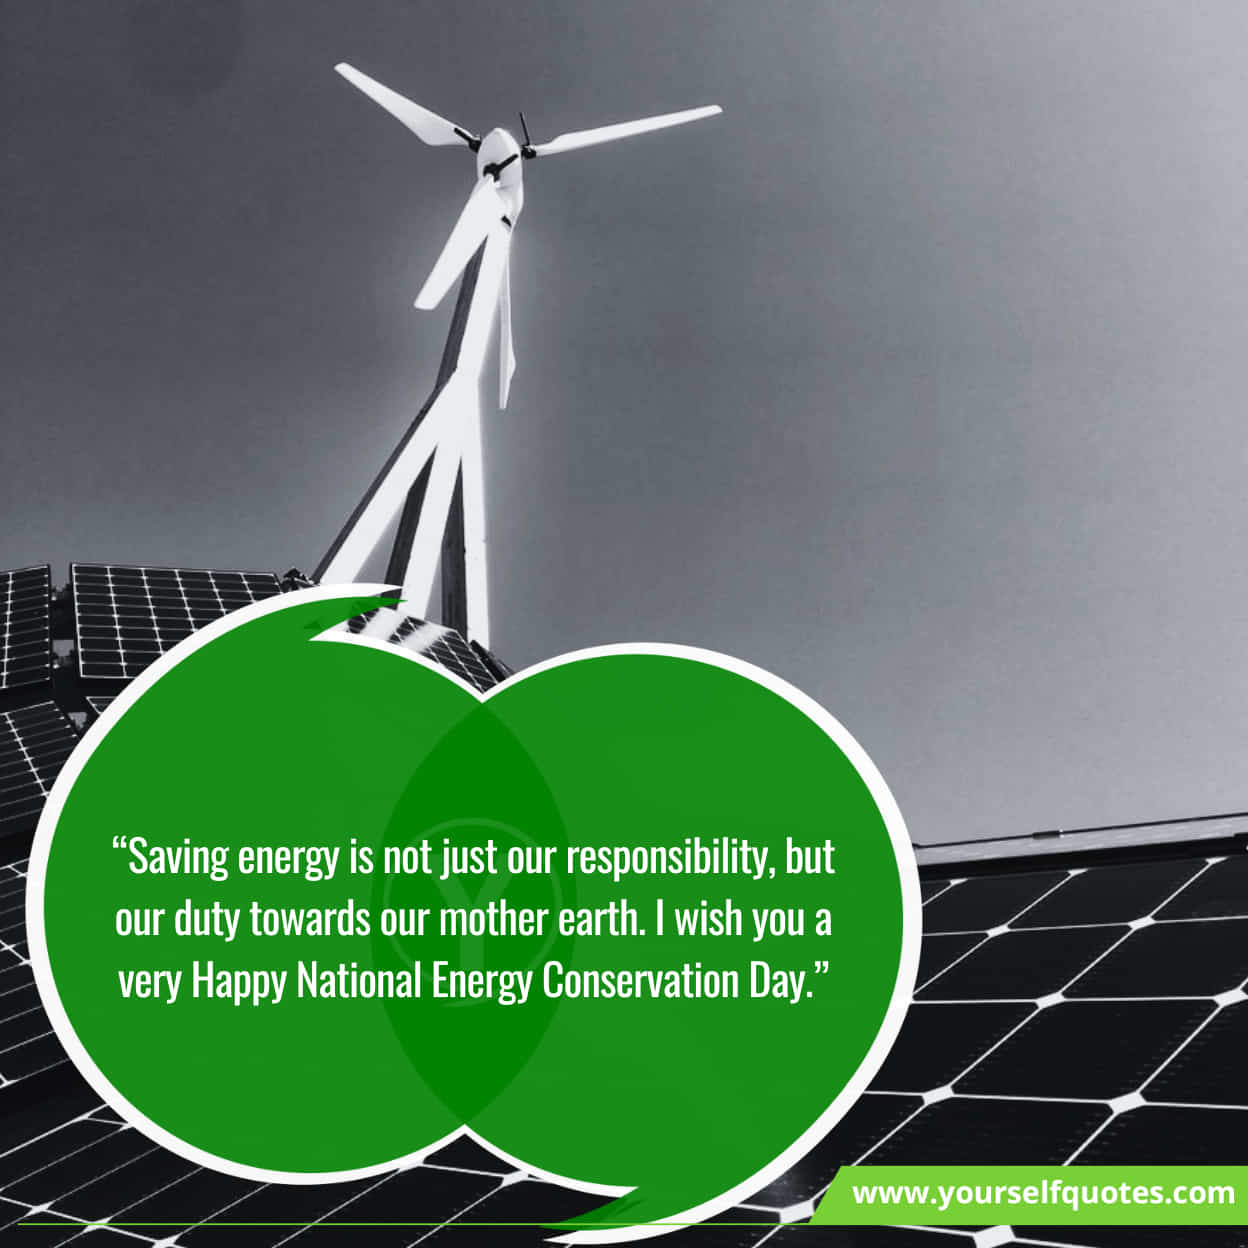 National Energy Conservation Day Quotes, Wishes & Messages